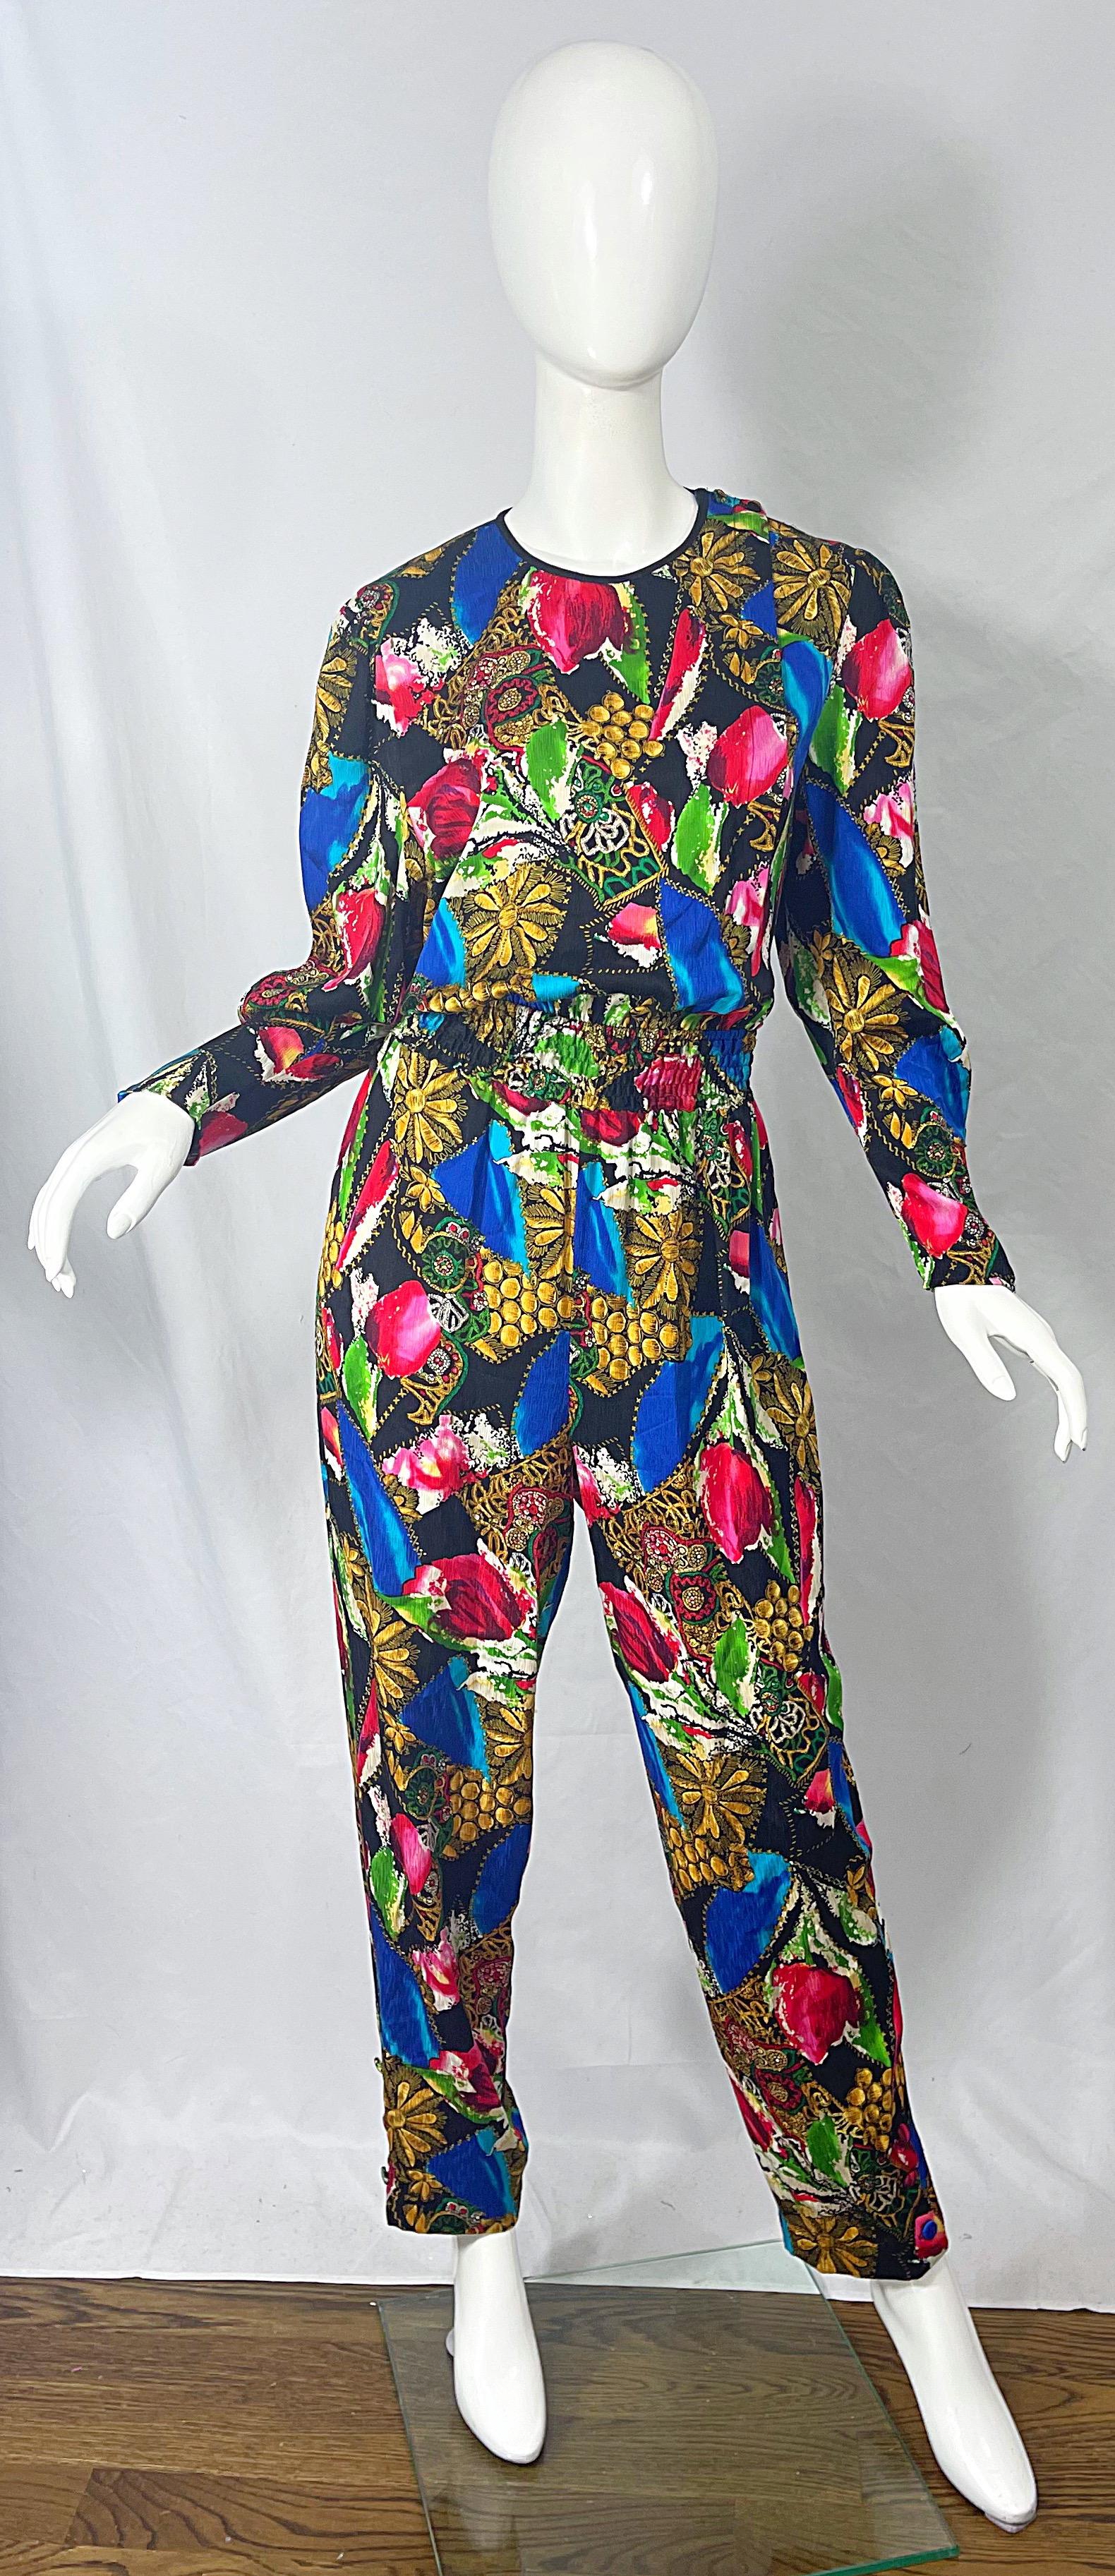 Chic 80S DIANE FREIS jewel and flower print silk jumpsuit ! Features bright colors of blue, green, pink, yellow, black and white throughout. Hidden buttons up the front. Pockets at each side of the waist. Mock buttons at each leg opening. Can easily